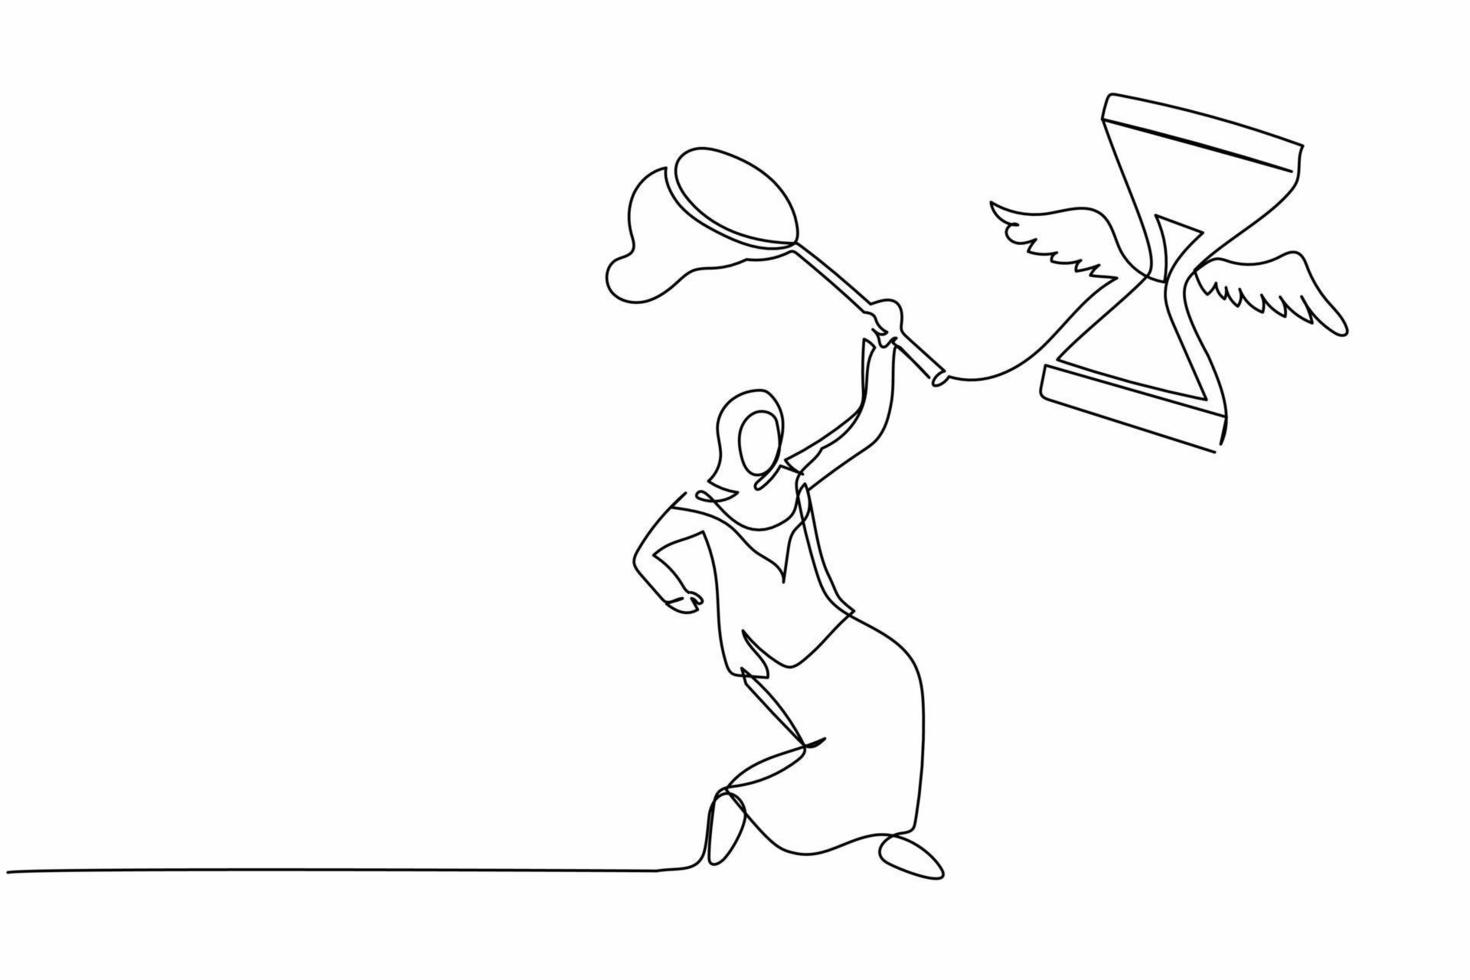 Single one line drawing Arab businesswoman try to catching flying hourglass with butterfly net. Losing measurement project deadline. Business metaphor. Continuous line draw design vector illustration